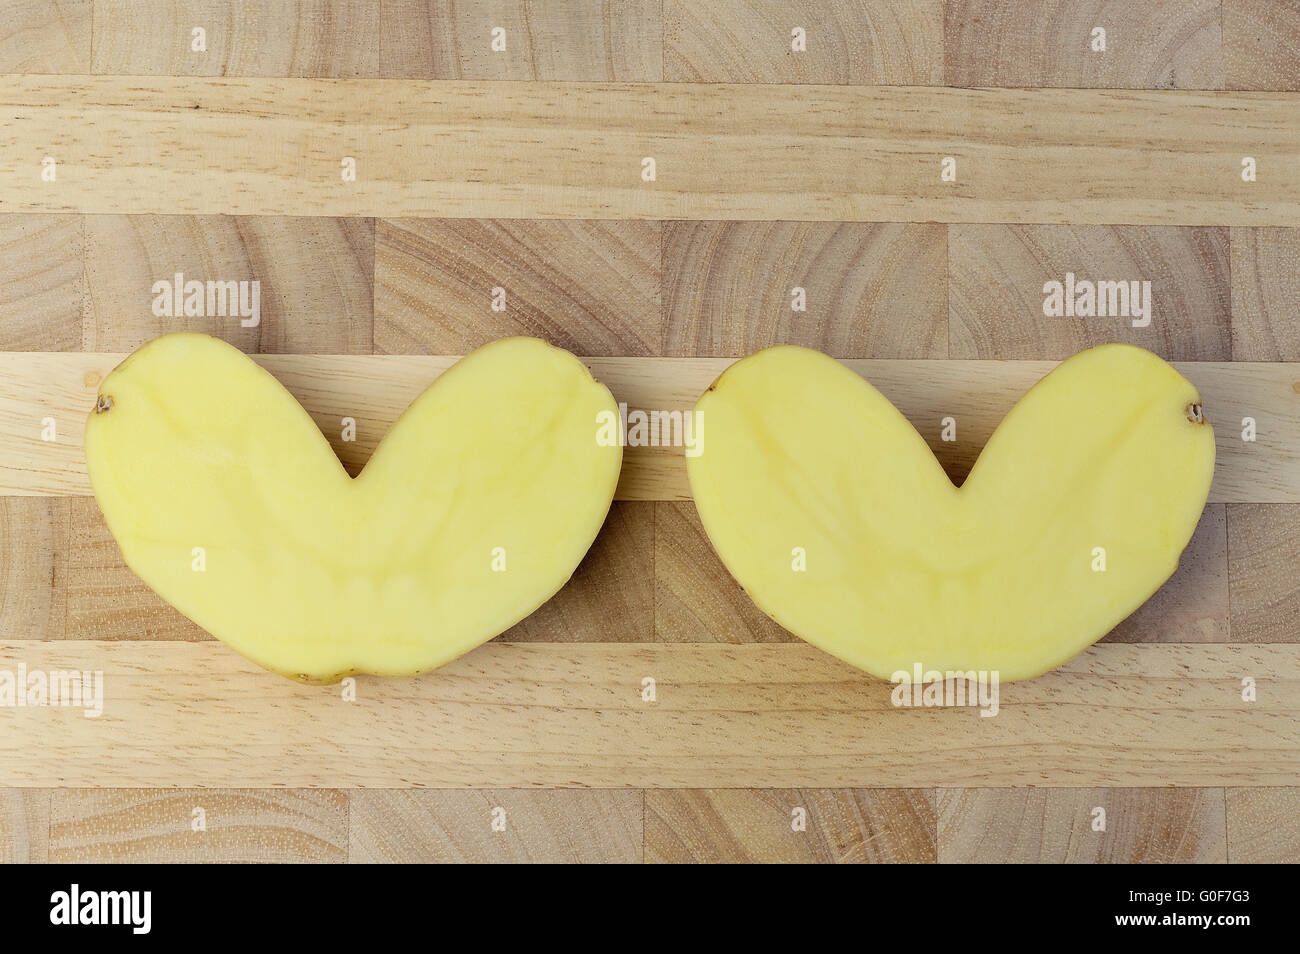 haves of a potato in the shape of a heart Stock Photo